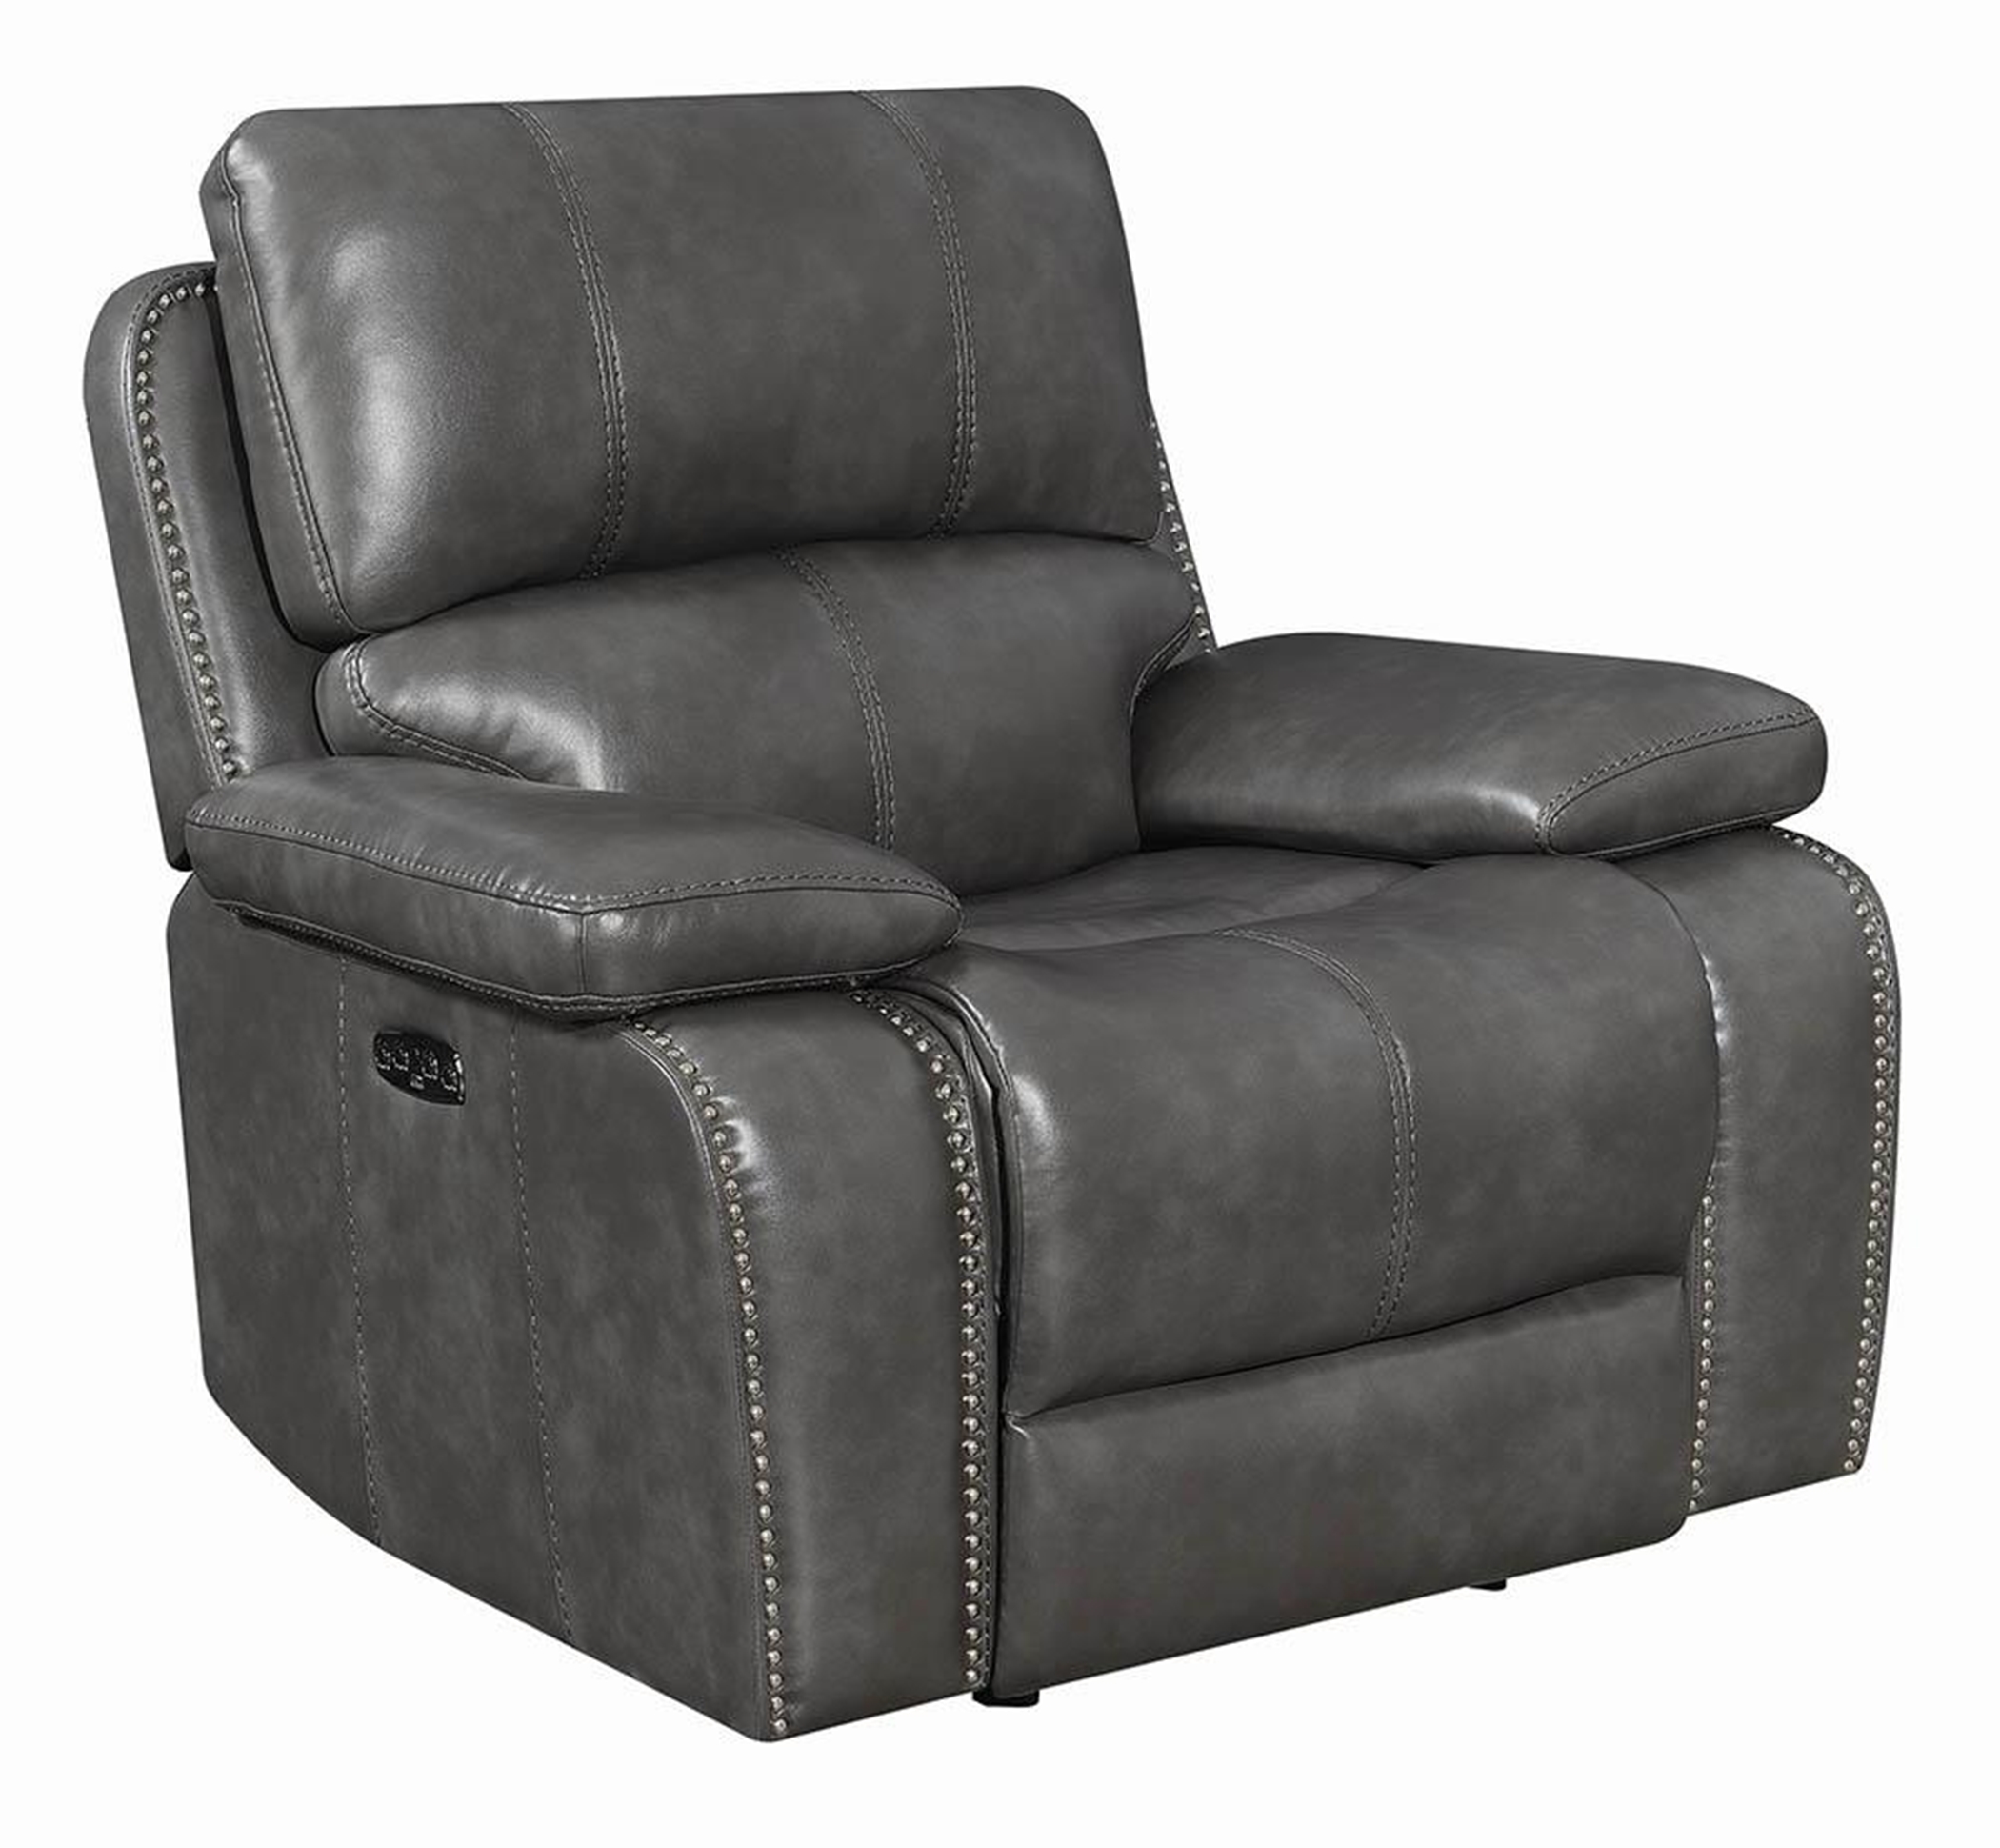 Ravenna Charcoal Power^2 Glider Recliner - Click Image to Close